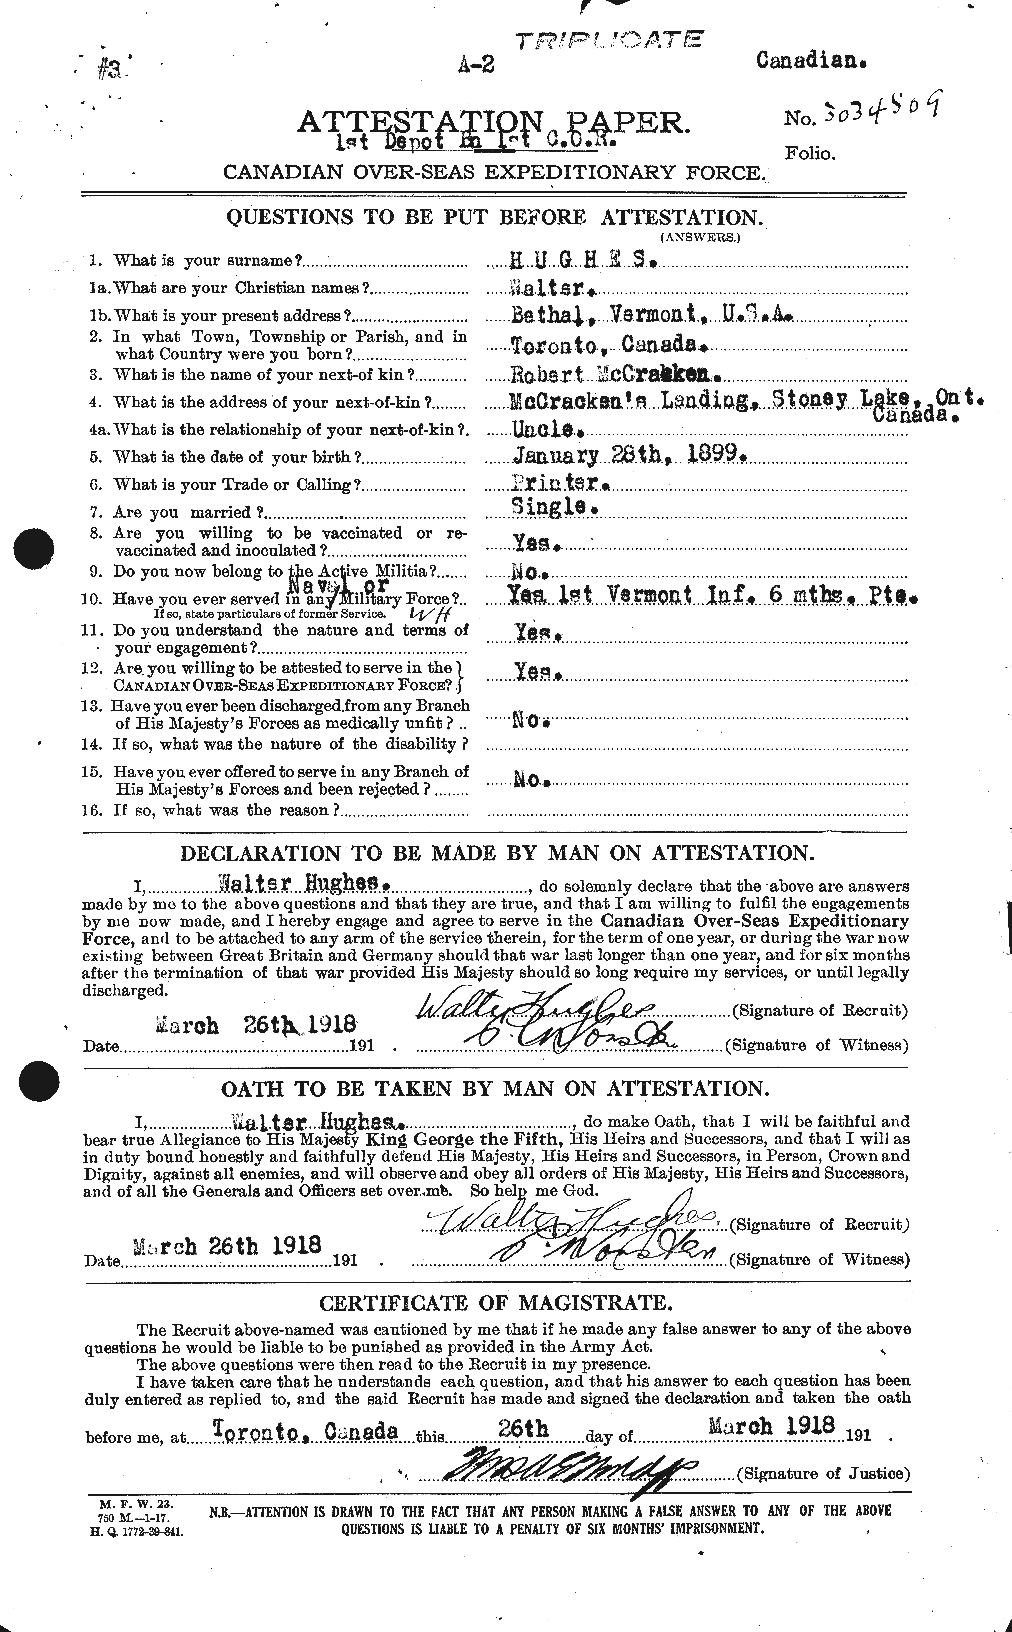 Personnel Records of the First World War - CEF 405858a